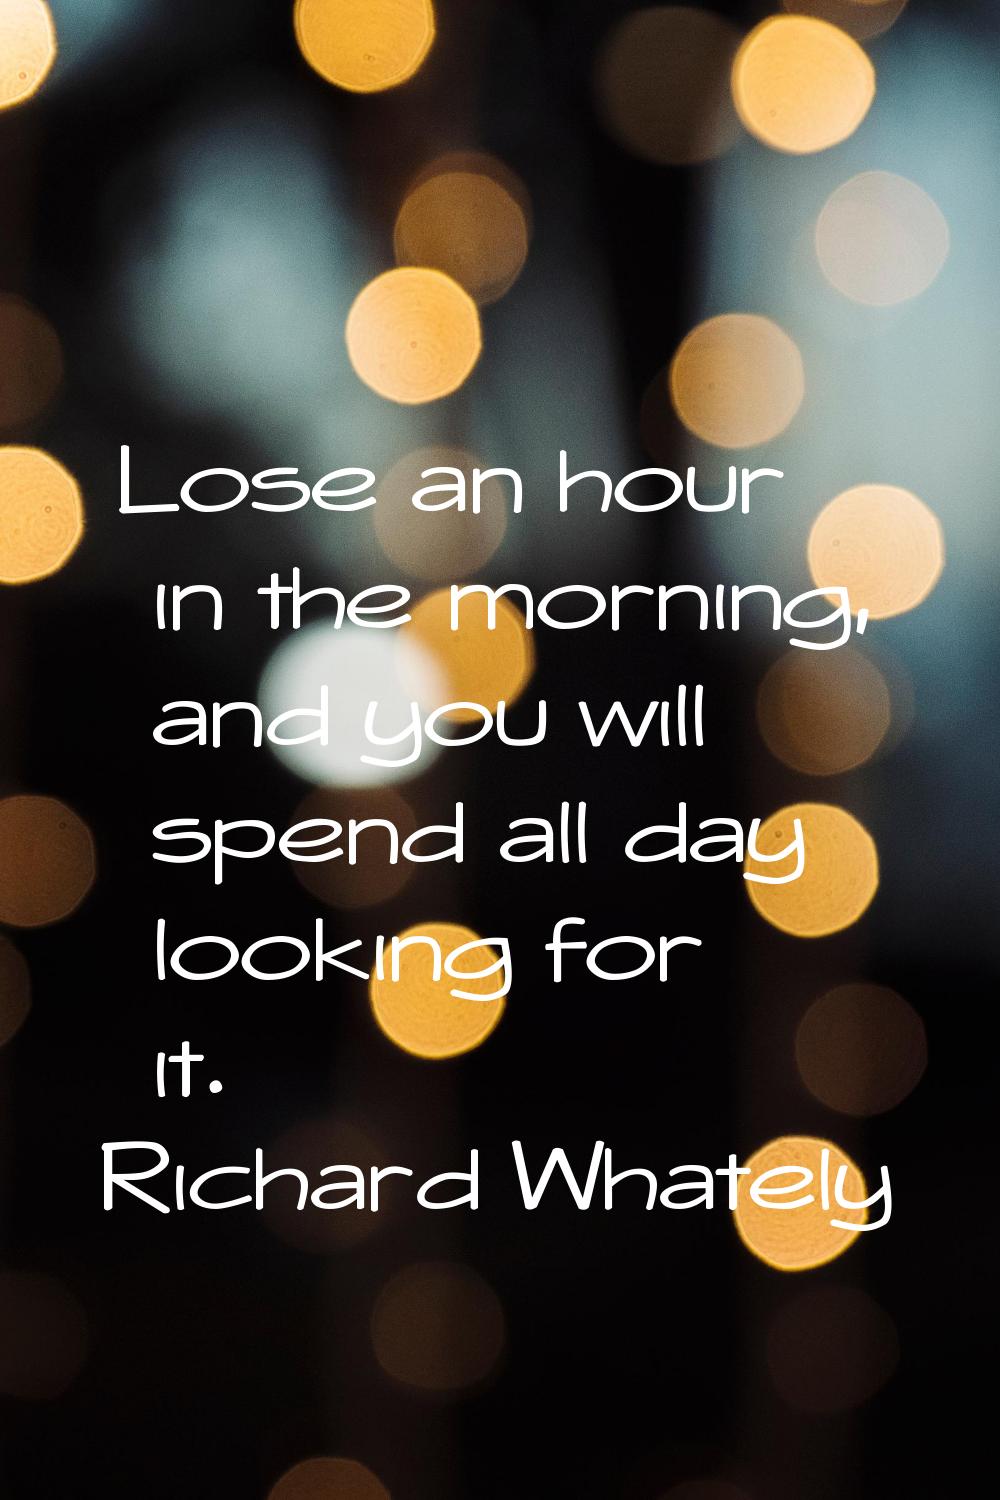 Lose an hour in the morning, and you will spend all day looking for it.